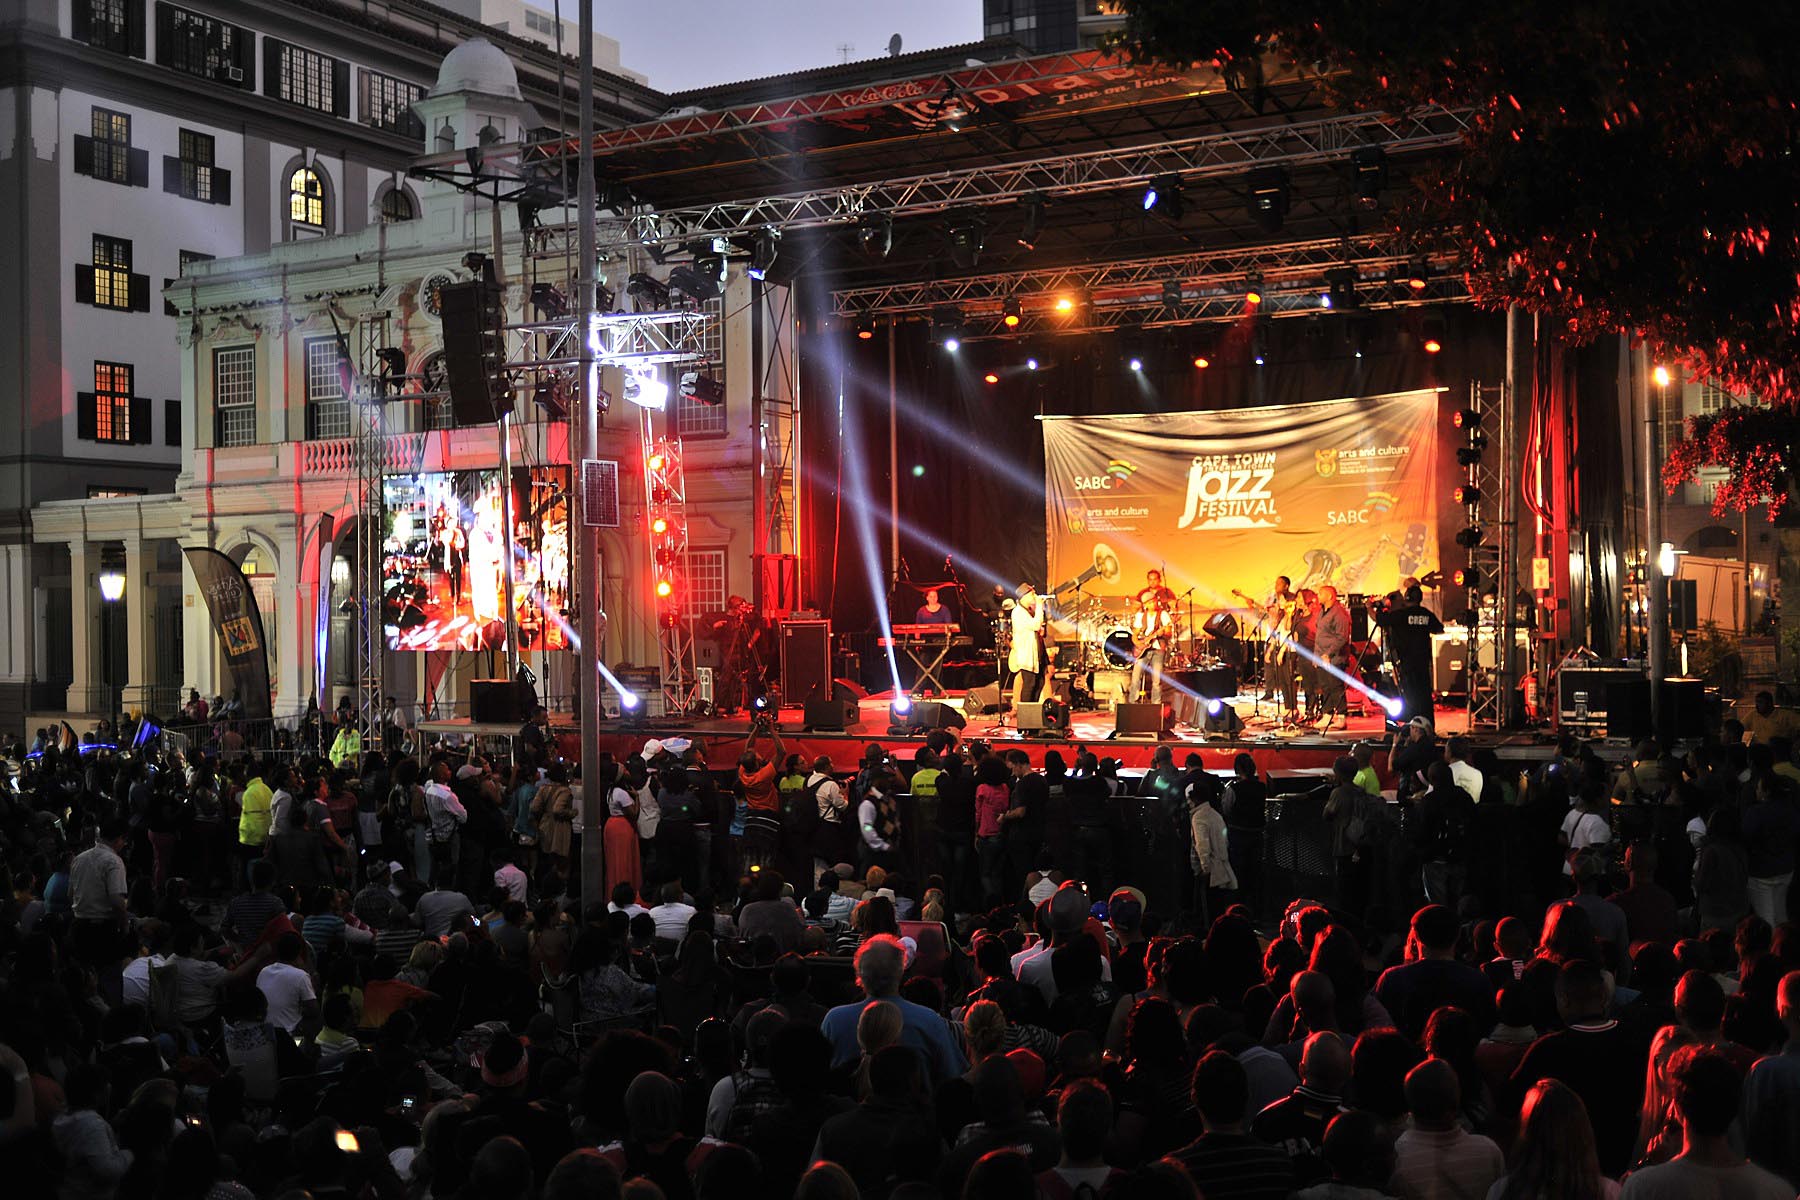 Greenmarket Square was packed for the free jazz concert. Photo: Bruce Sutherland (City of Cape Town)